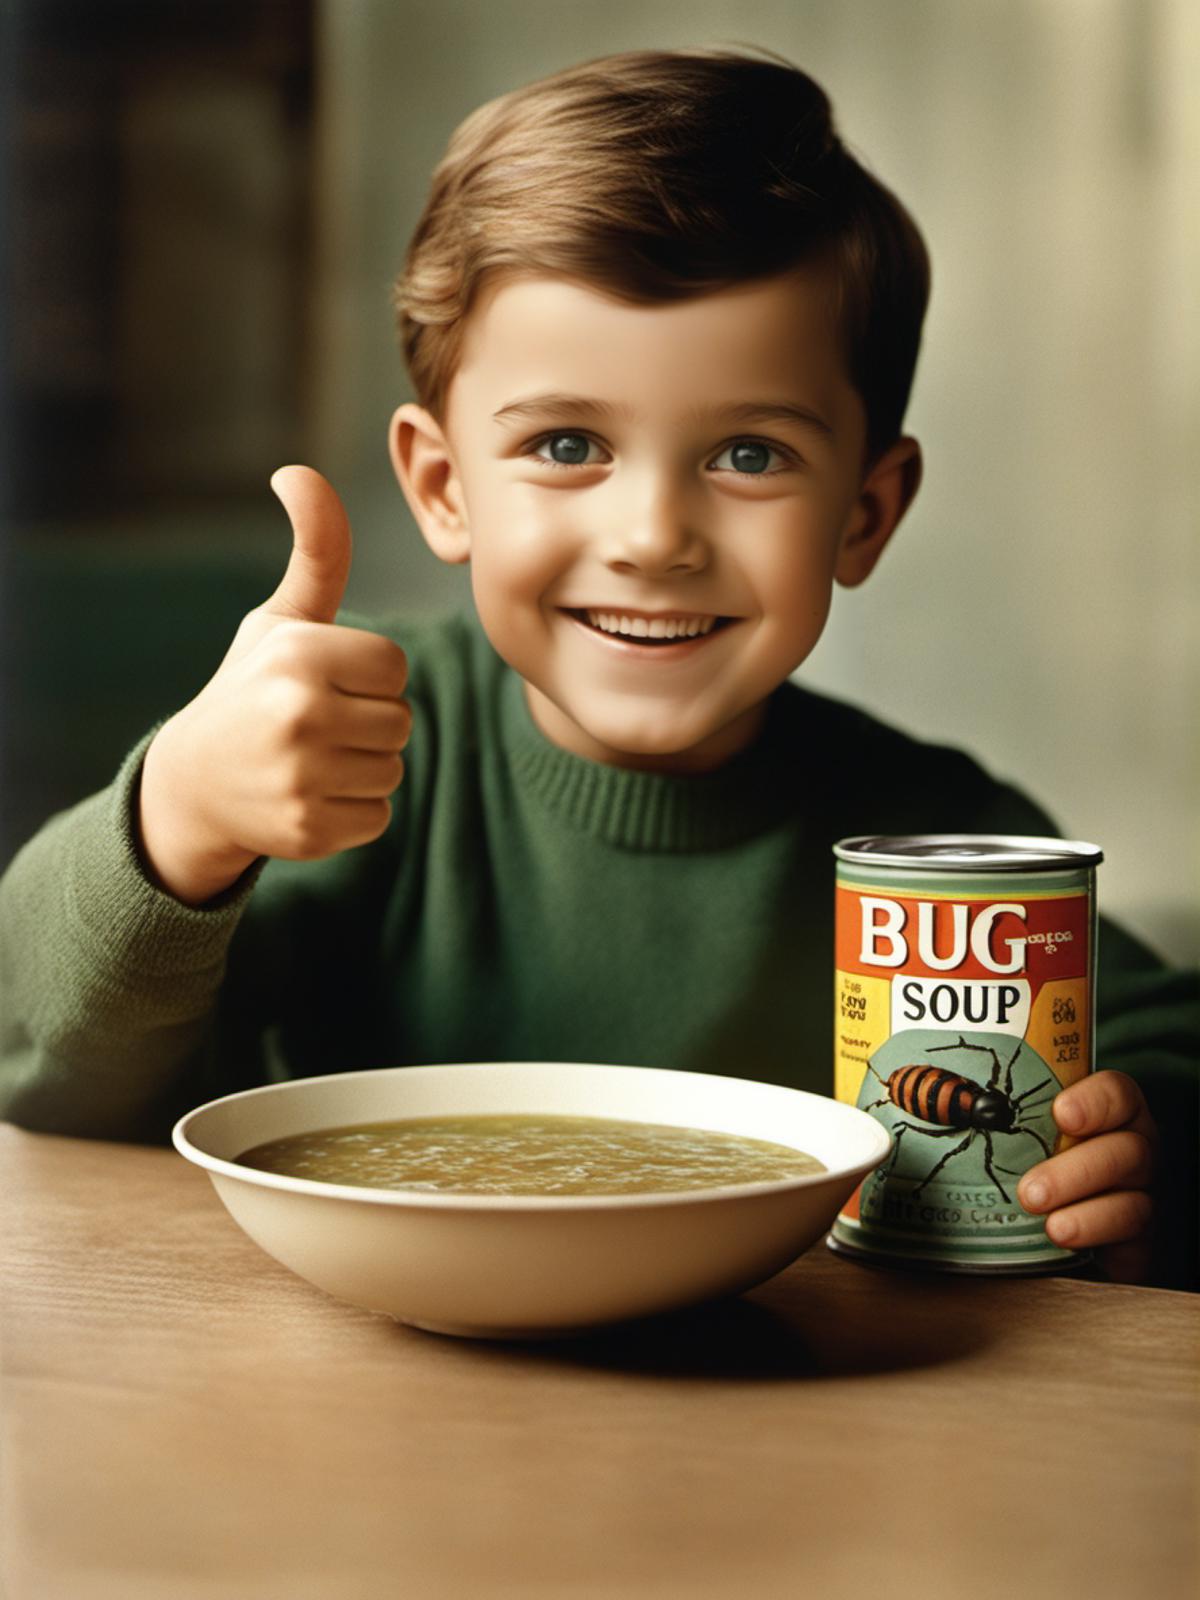 A young boy giving a thumbs up while holding a can of soup.